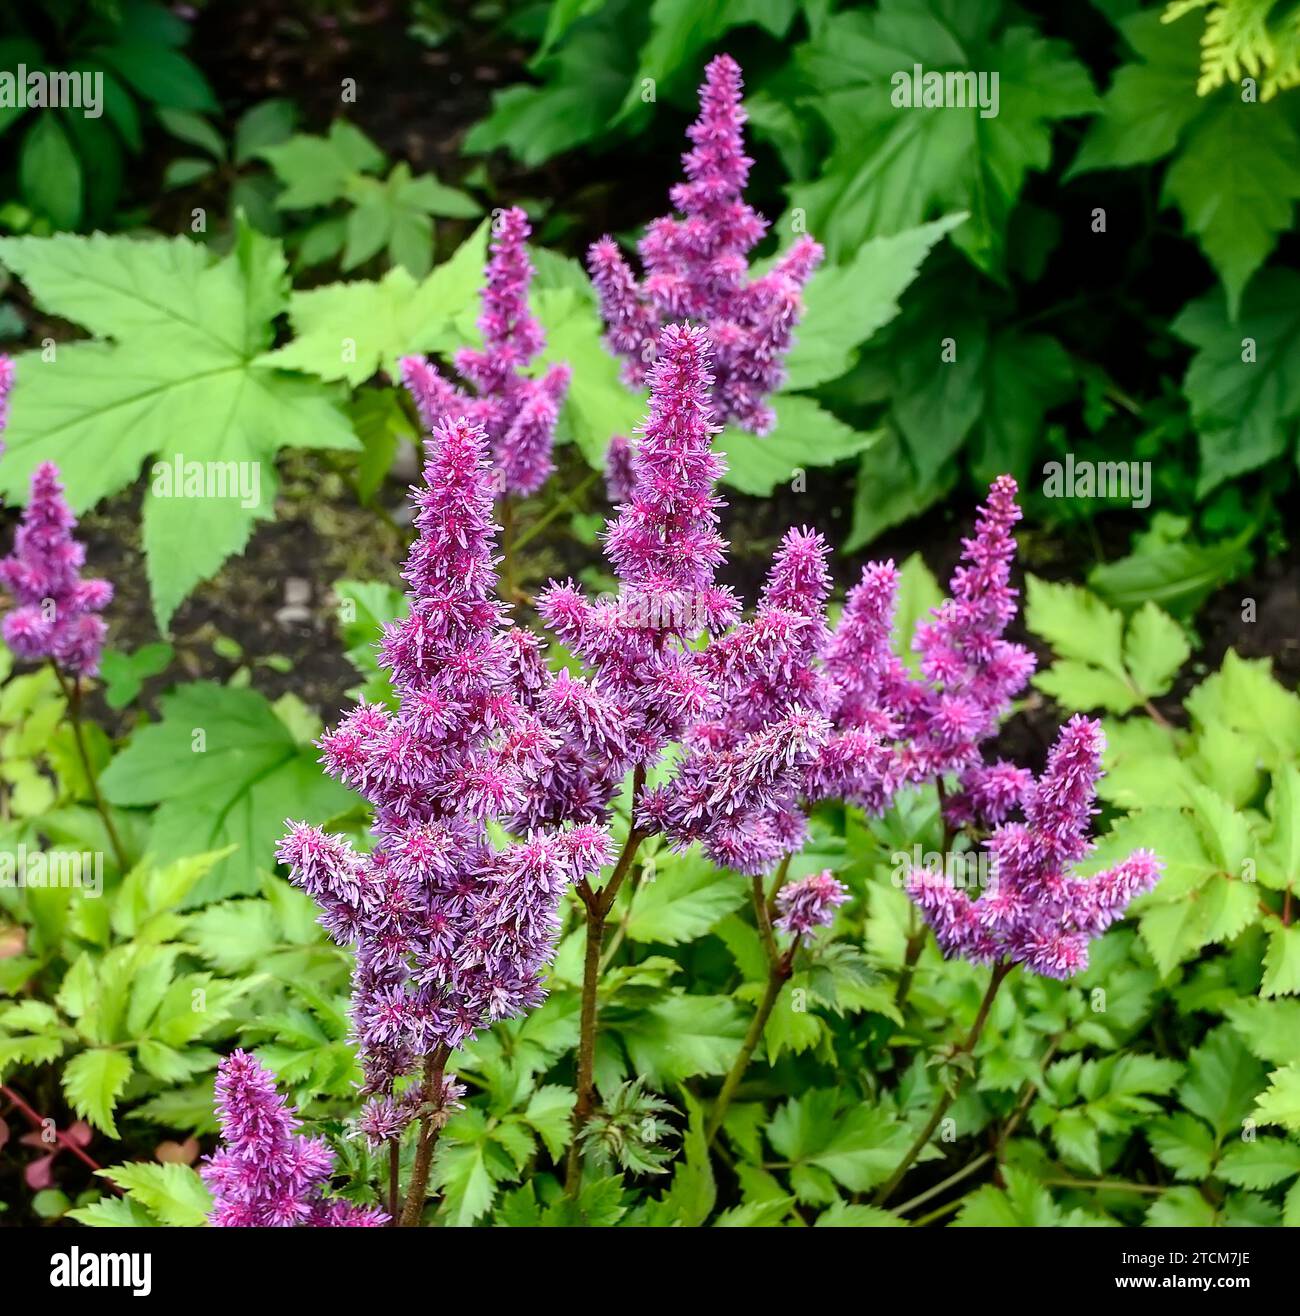 Purple pink fluffy inflorescence of Astilbe chinesis variety Pumila in summer garden on blurred foliage background, close up. Also known as falce spir Stock Photo